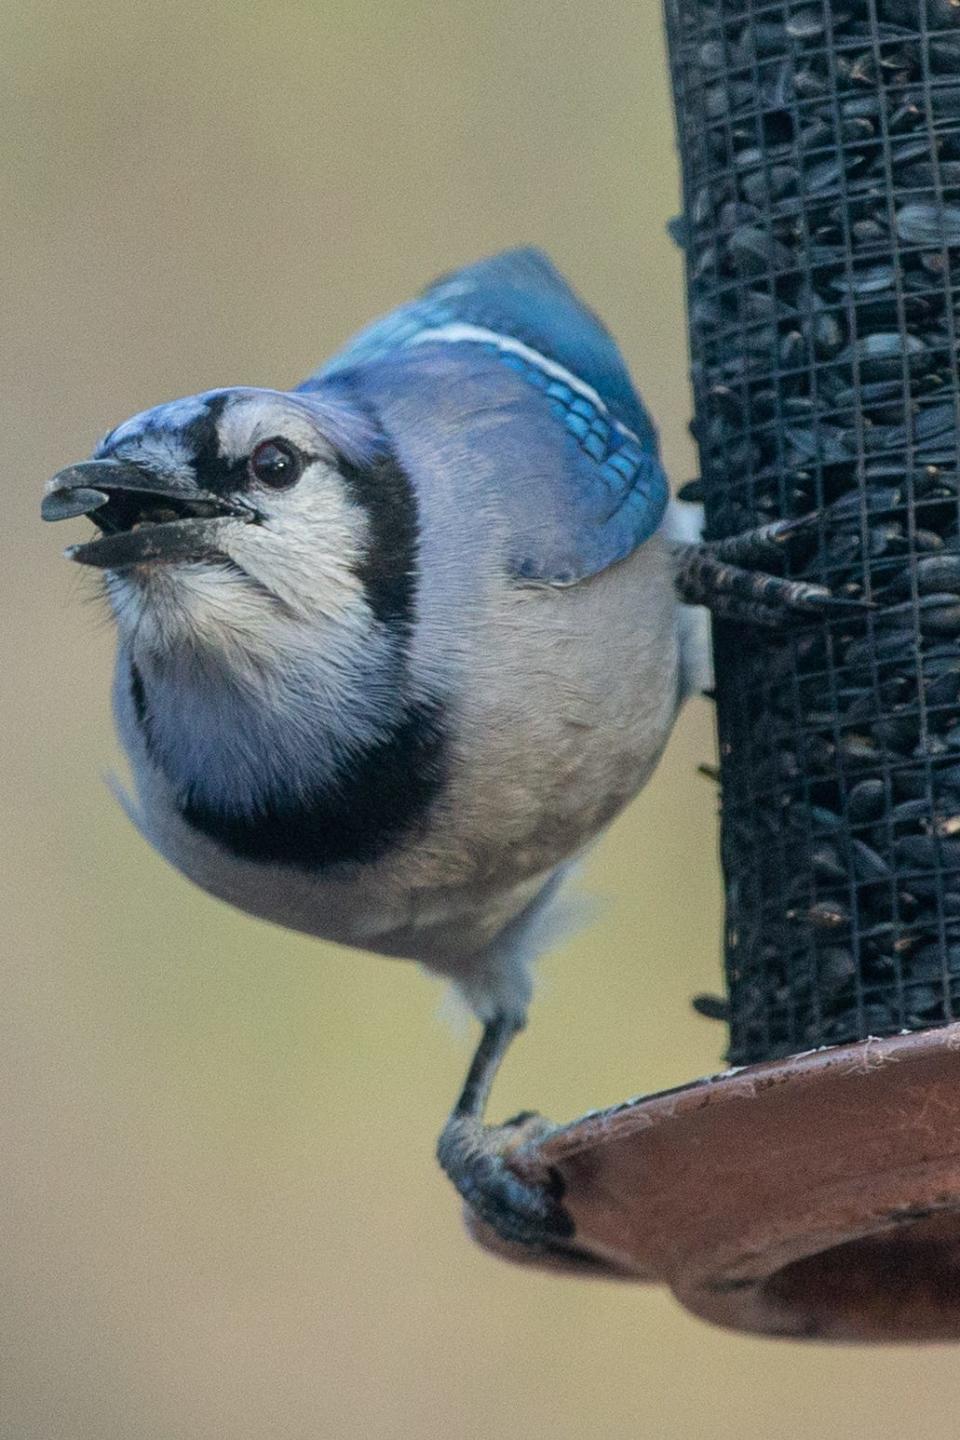 A blue jay fills his beak with sunflower seeds from a feeder in Shawnee County on Sunday morning.